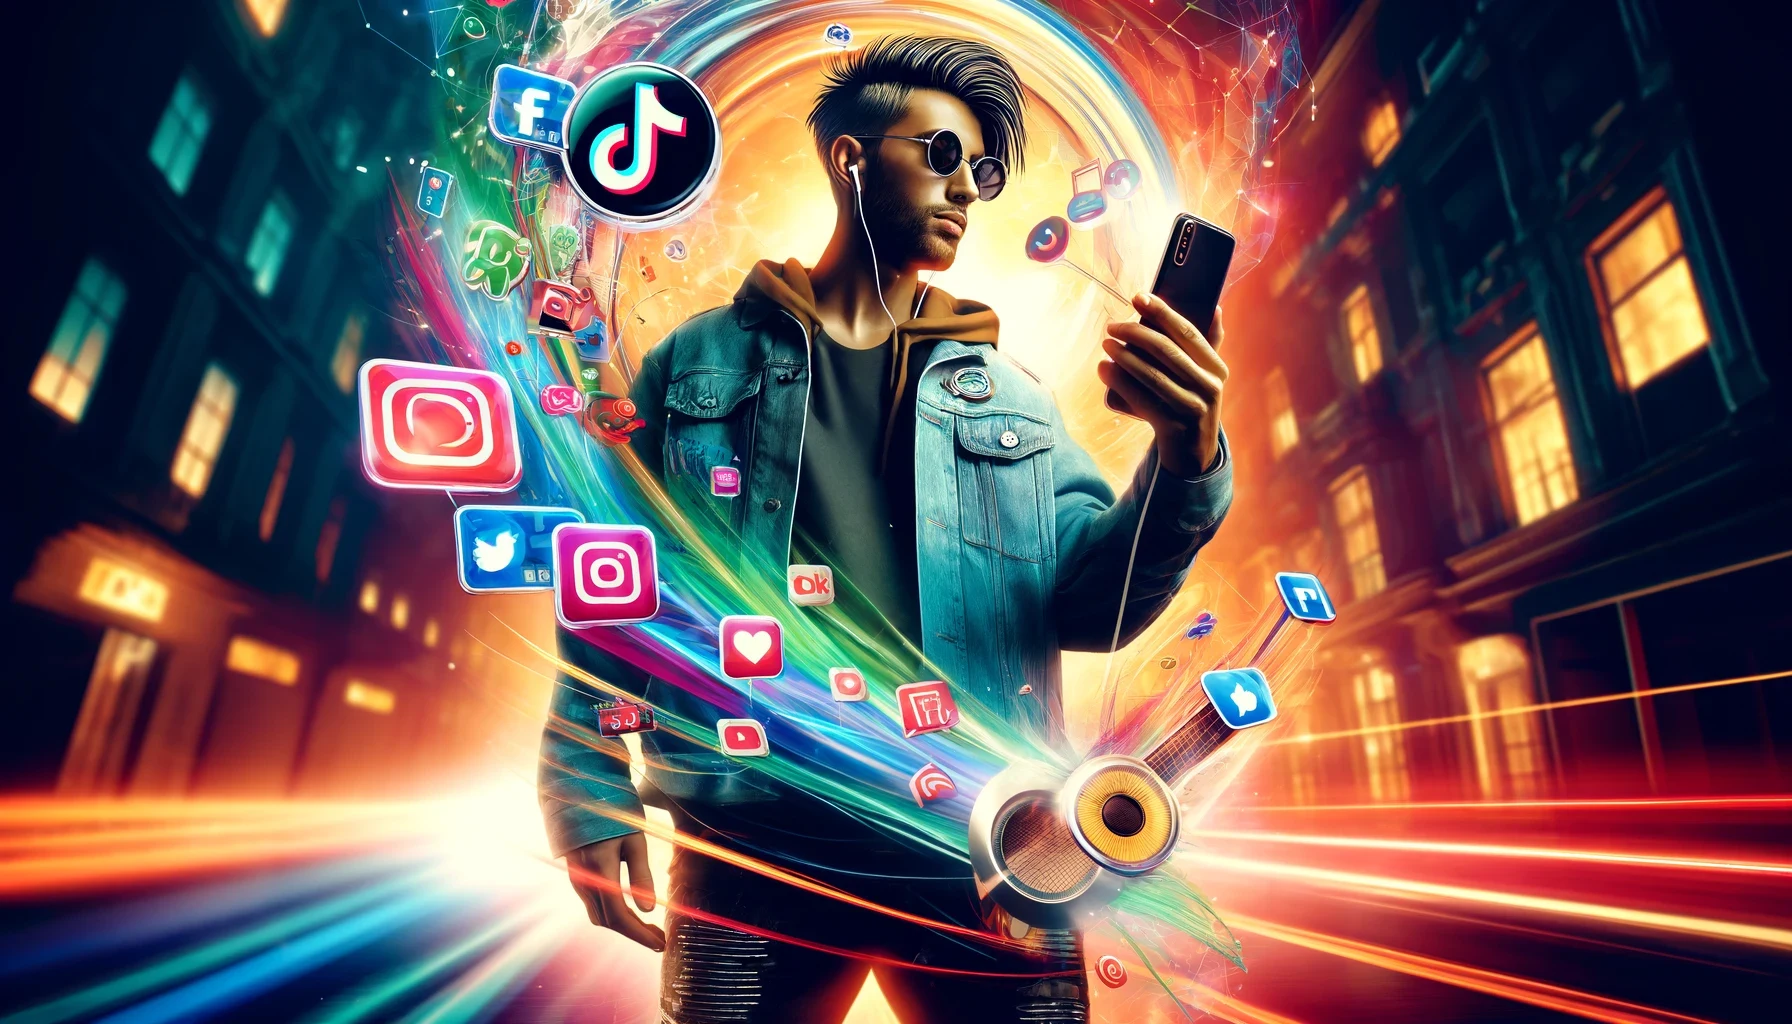 From novel idea to central strategy in the music industry, influencer marketing has potential challenges in the future that impacts artists, labels and music-based brands.